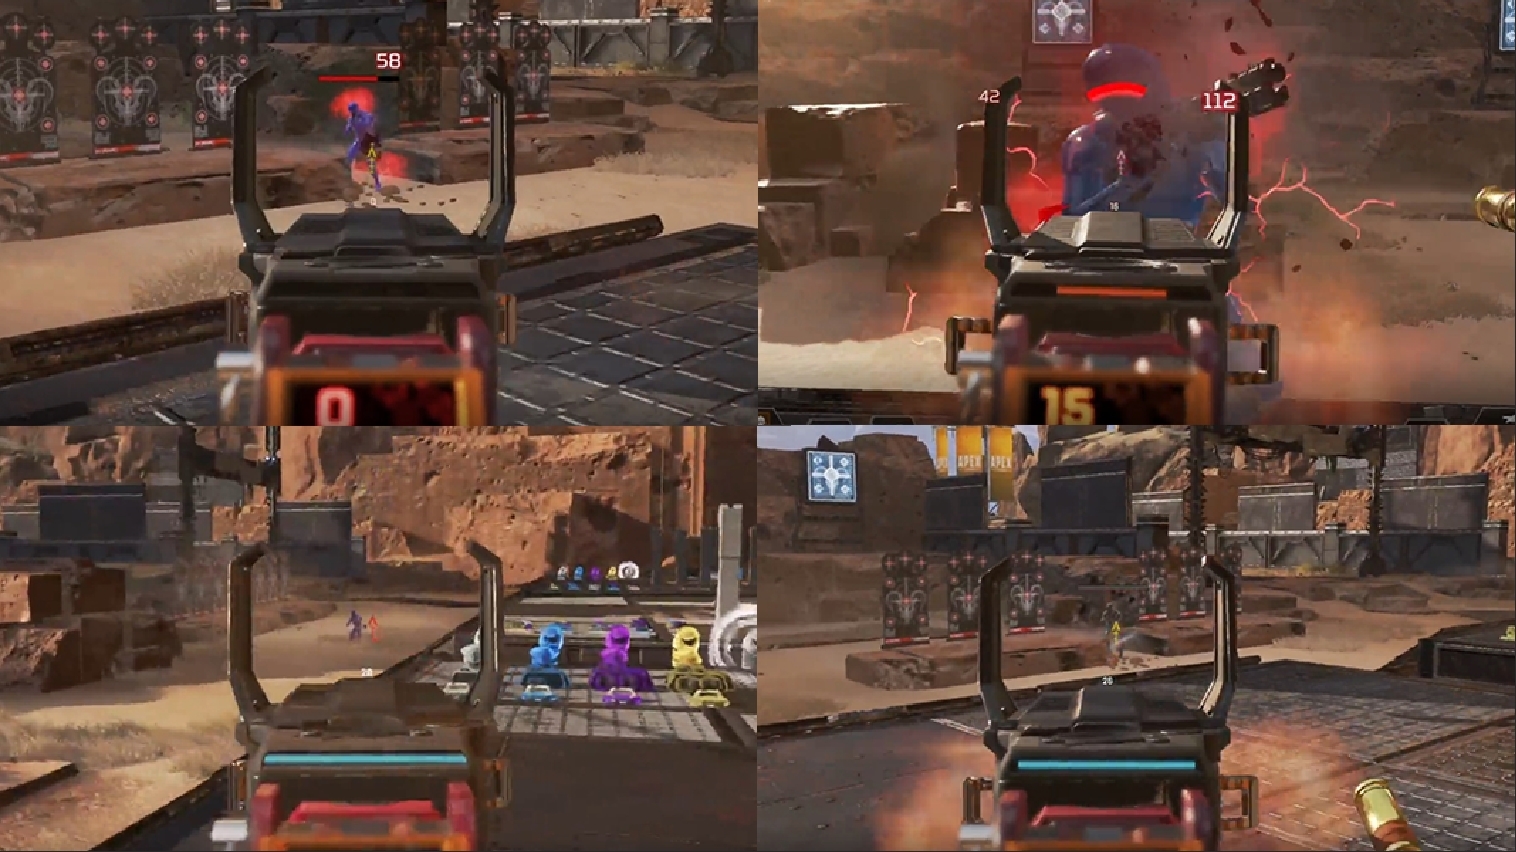 Alpha Intel A Simple Trick In Apexlegends Lets You Change The Color Of The Reticle On Sights How Its Done T Co Puka7naqme T Co 2azoedypza Twitter